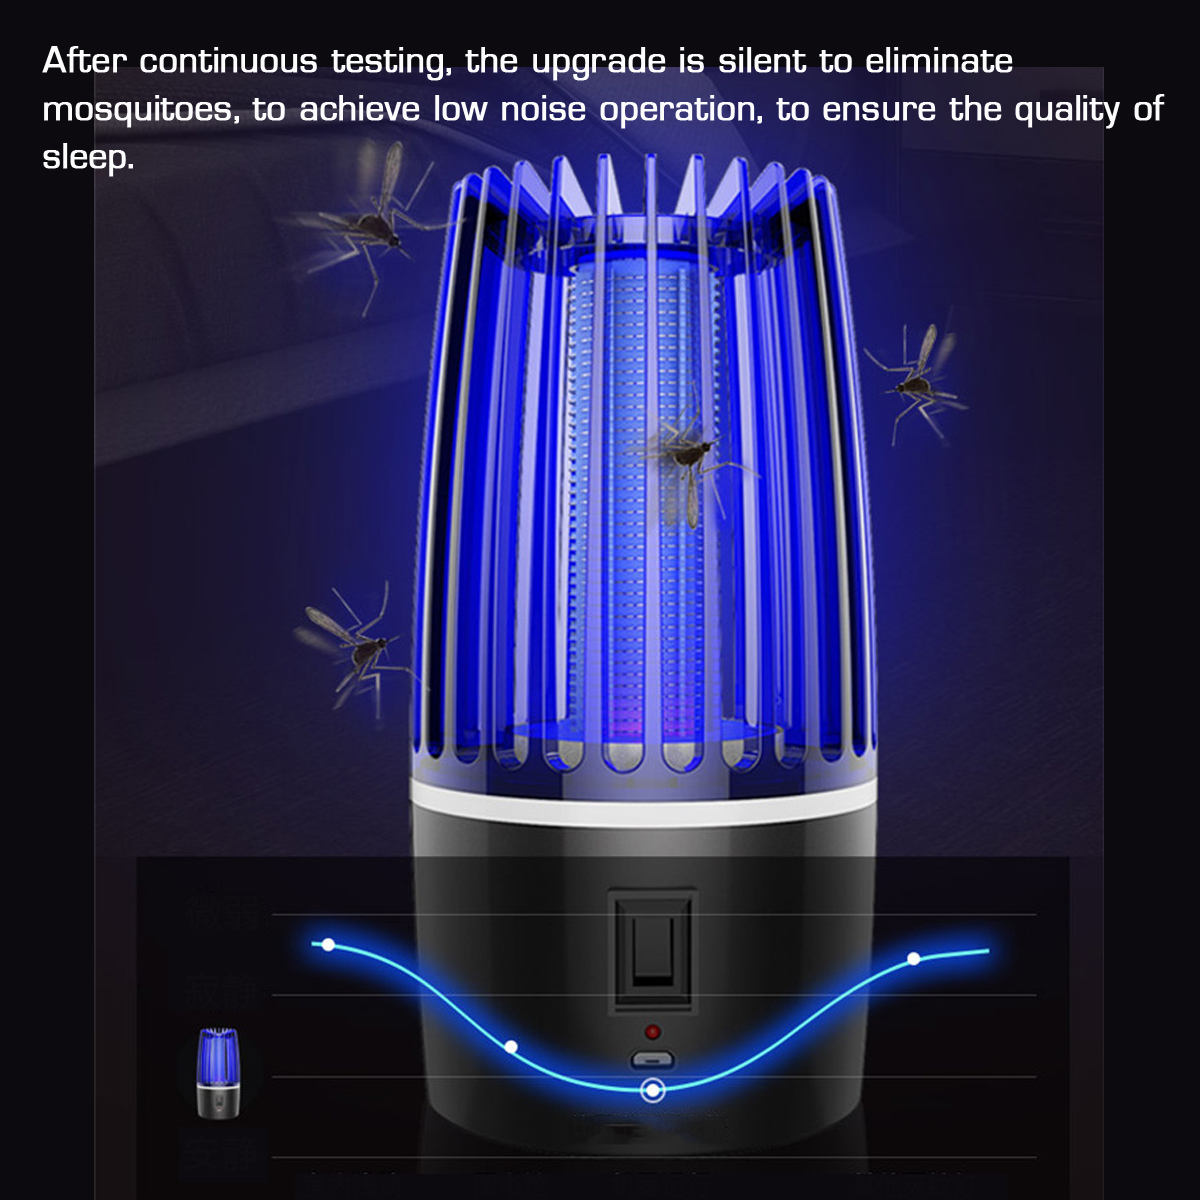 Rechargeable-5W-LED-Mosquito-Zapper-Killer-Fly-Insect-Bug-Trap-Lamp-Night-Light-DC5V-1668033-5